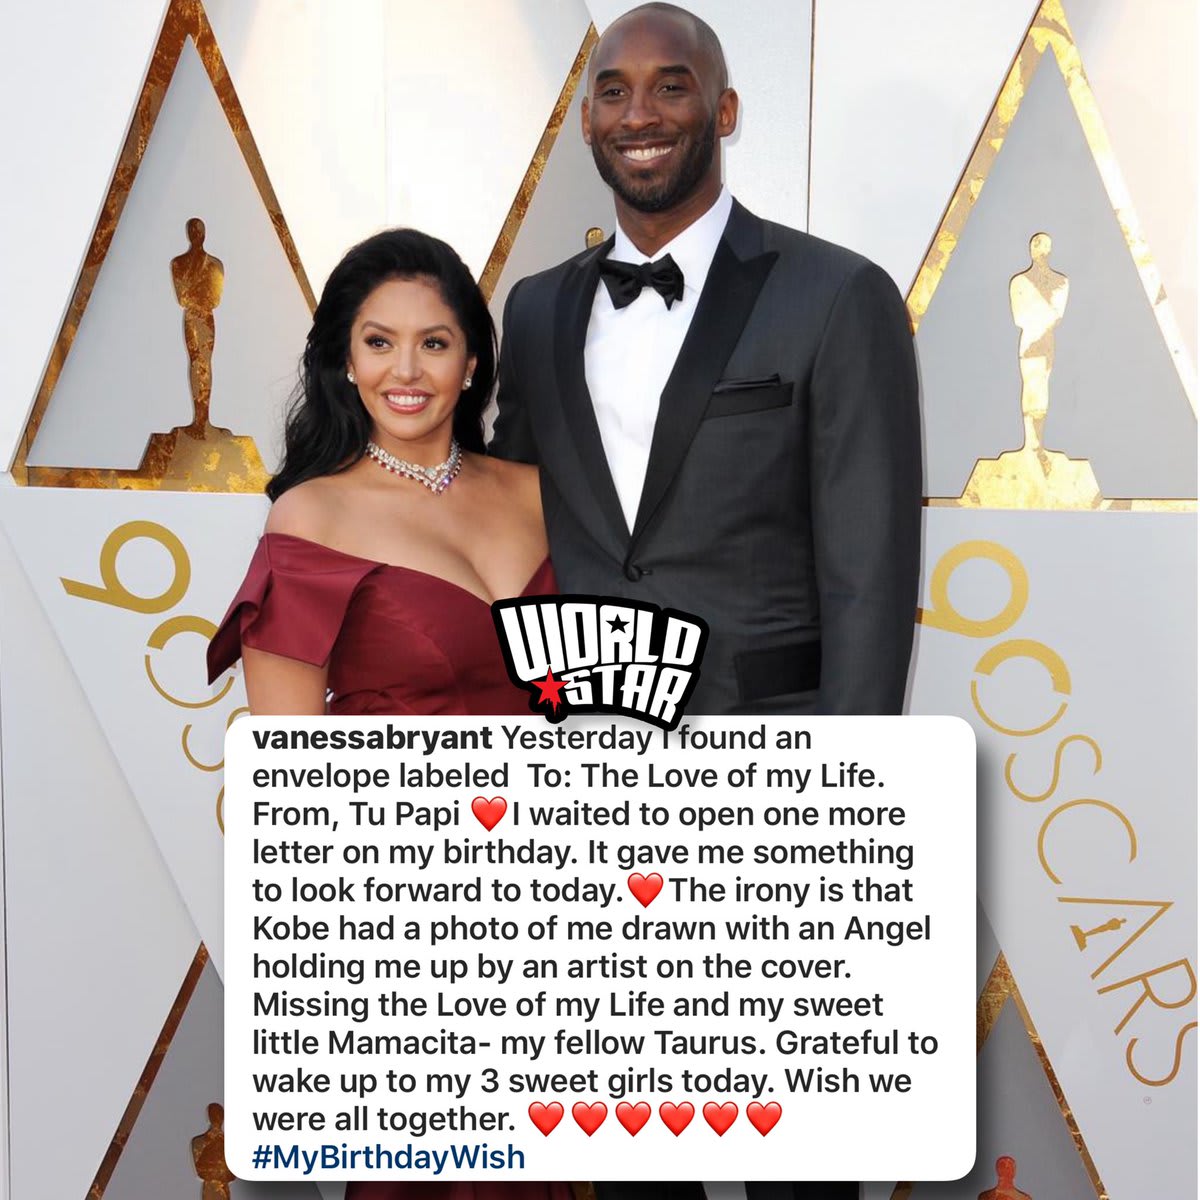 VanessaBryant shared one last letter from KobeBryant to open on her birthday.. HappyBirthday Vanessa! Our thoughts and prayers continue to be with her and her family!